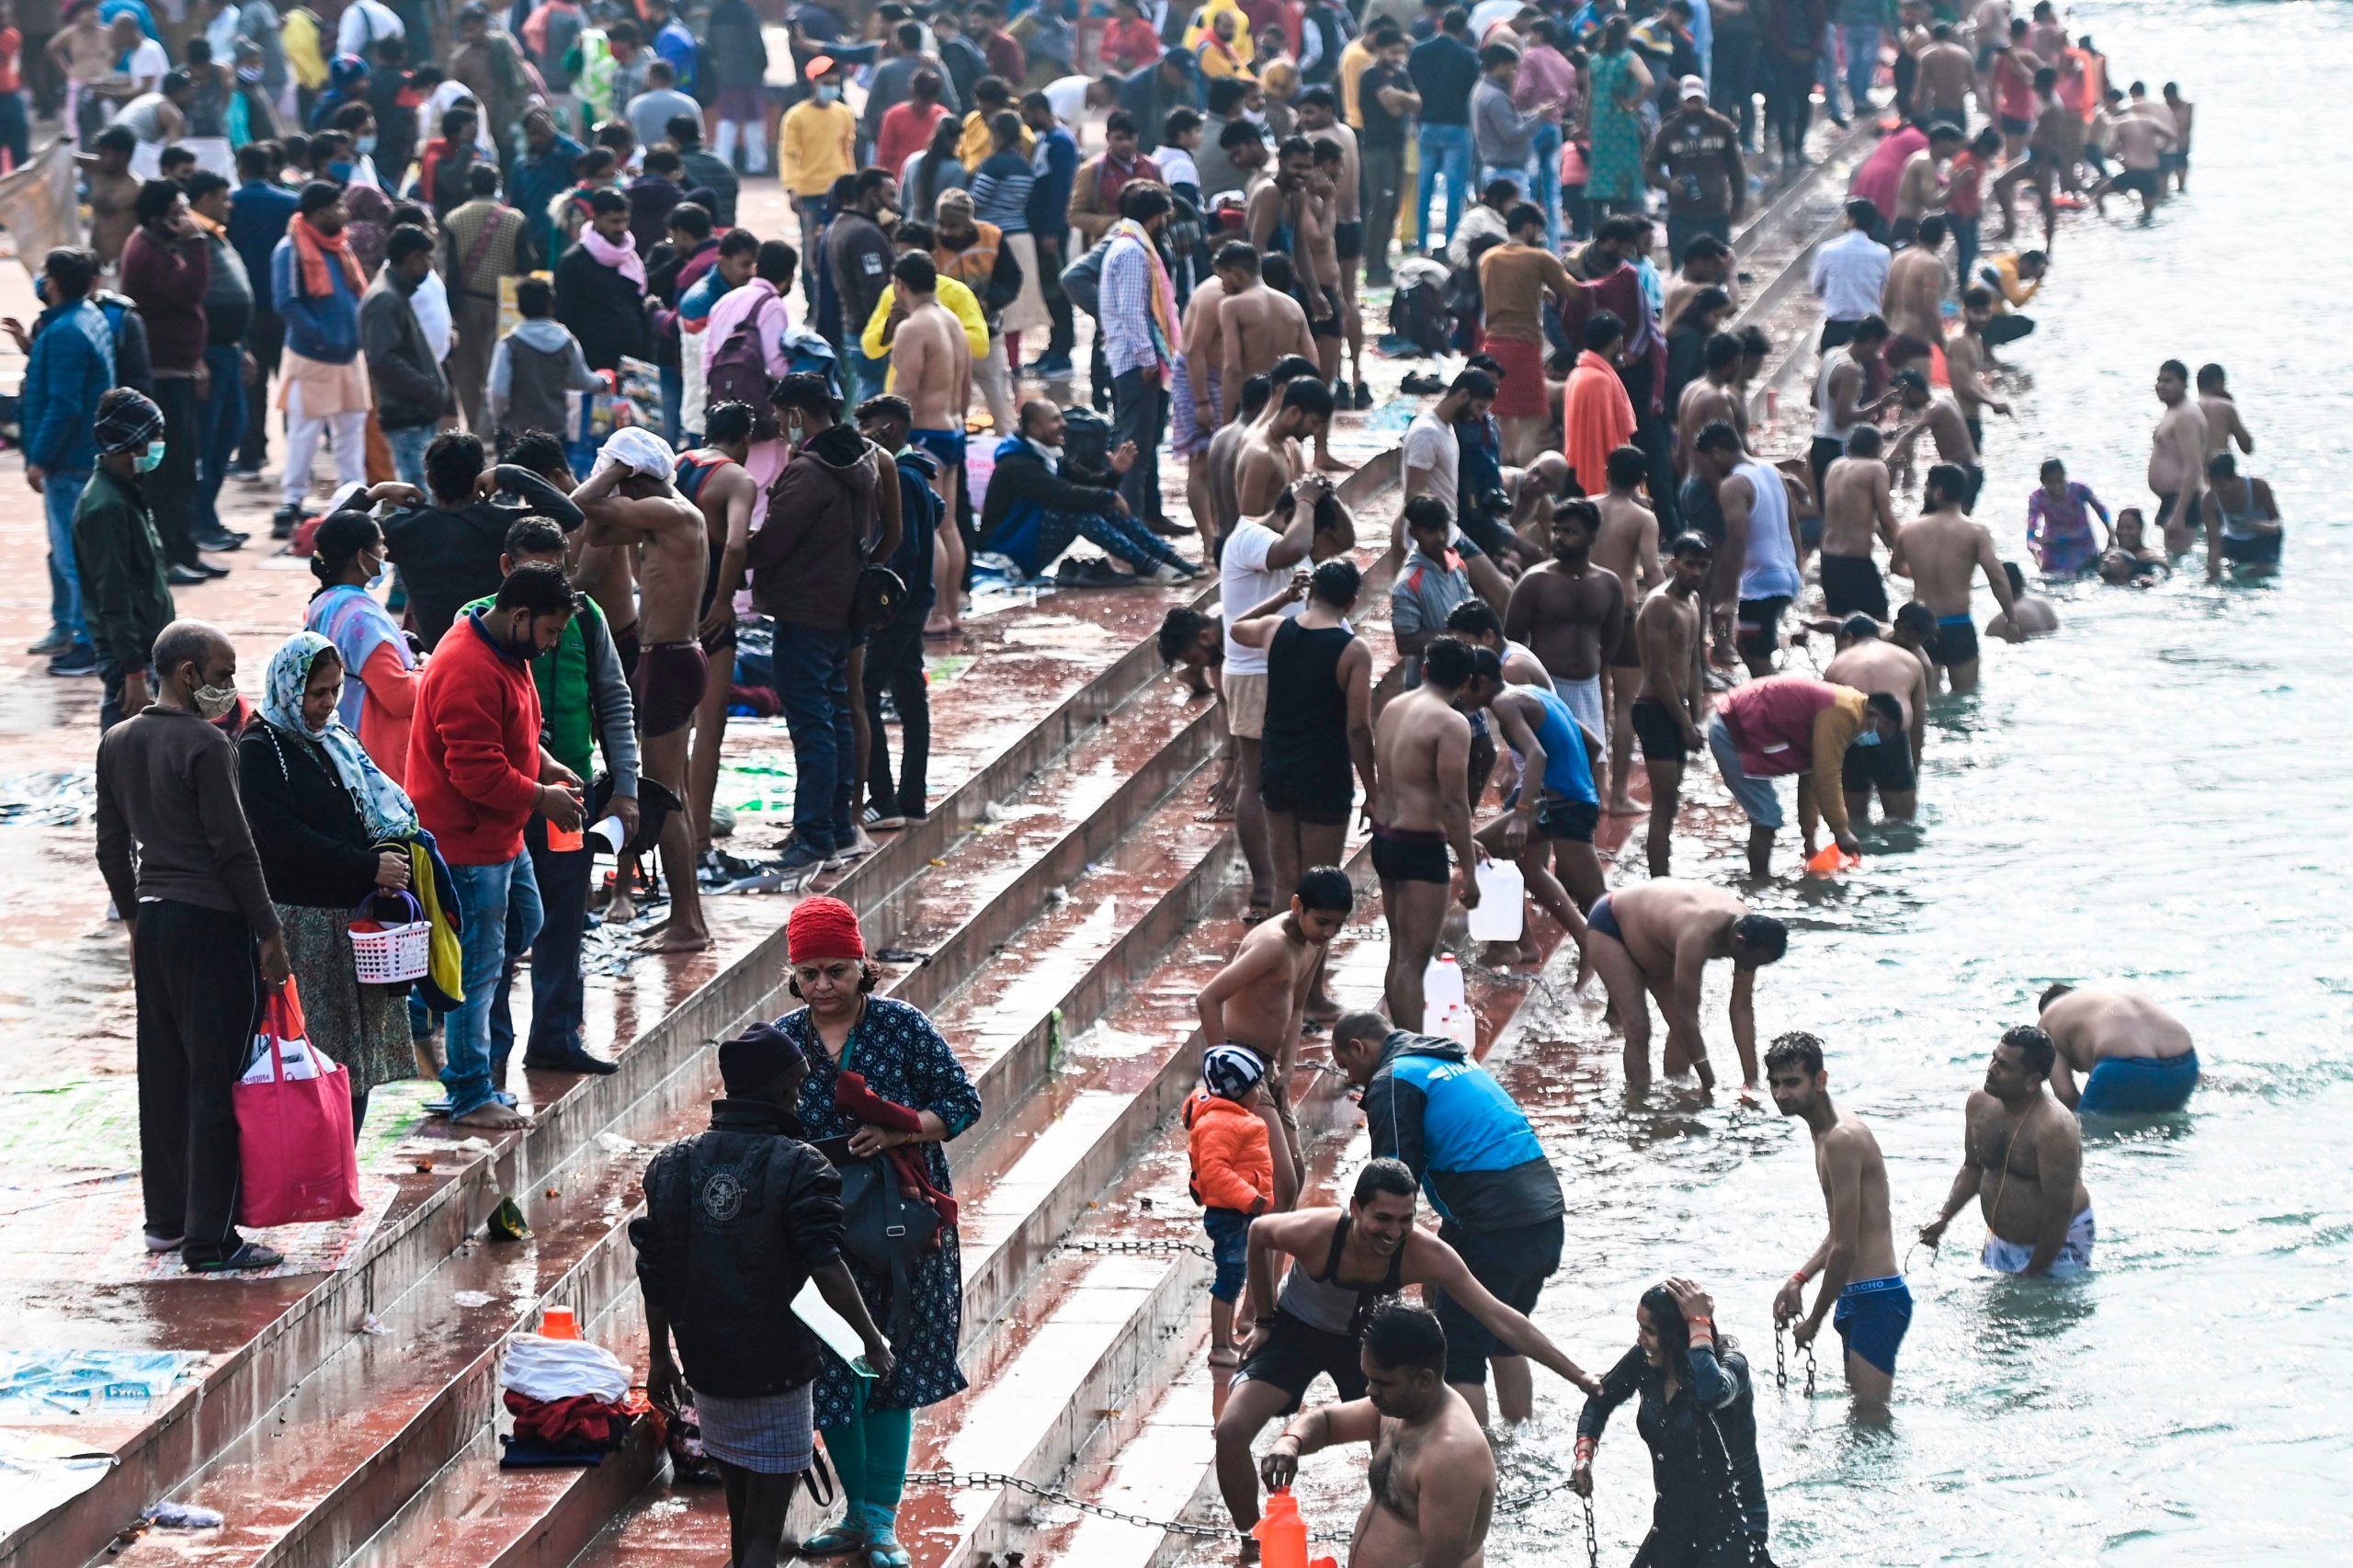 Hindu devotees take a holy dip in the waters of the River Ganges